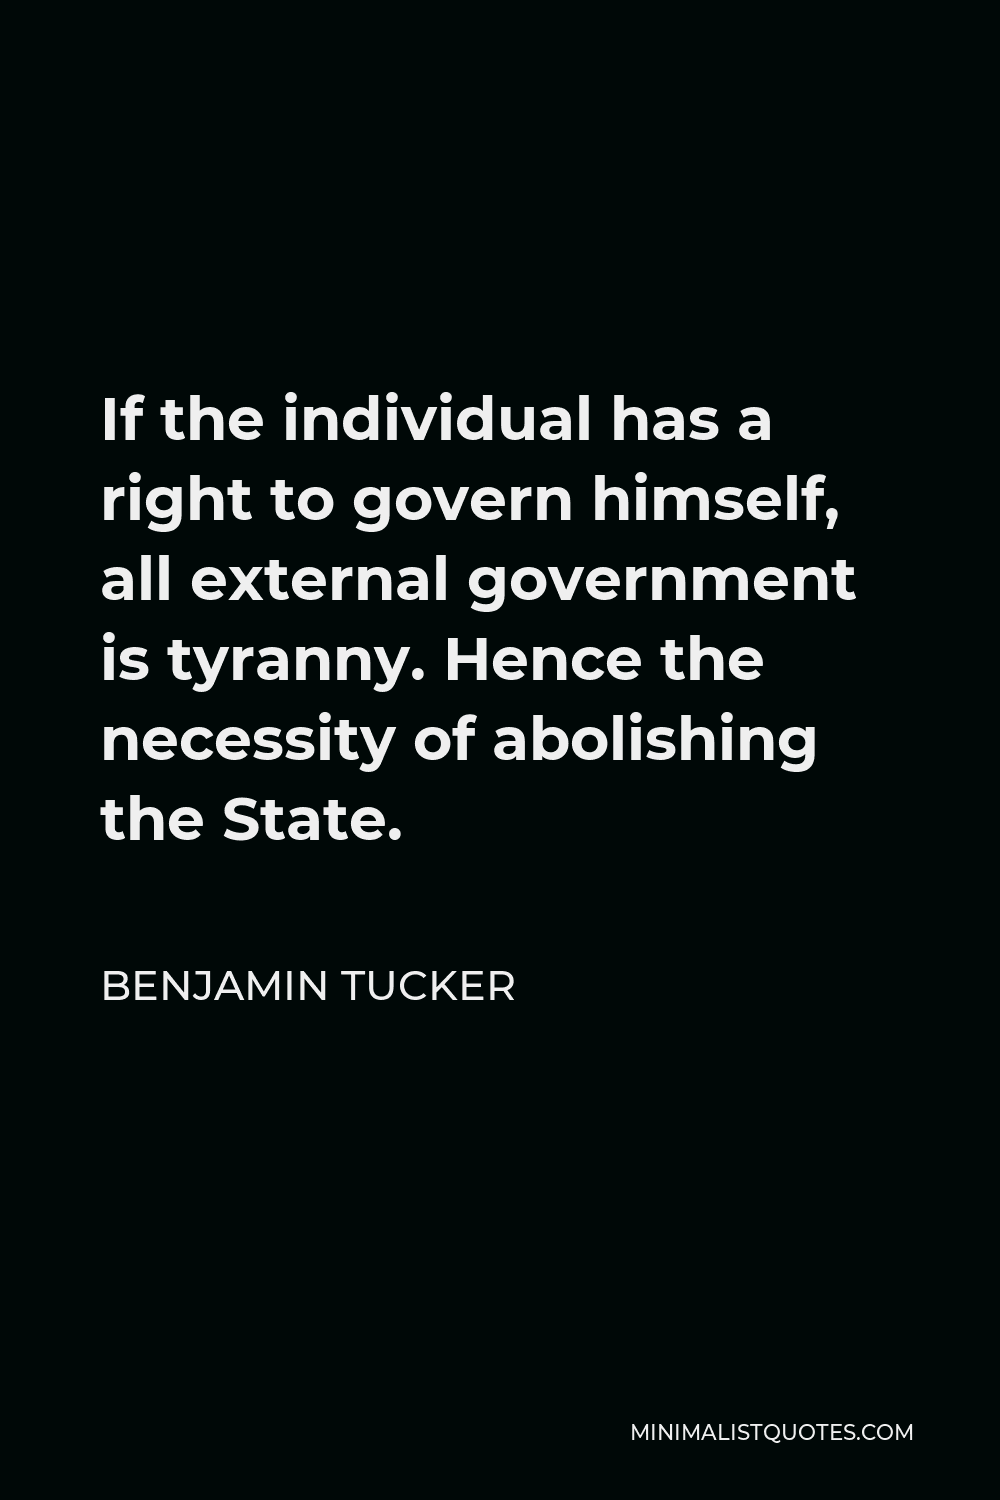 Benjamin Tucker Quote - If the individual has a right to govern himself, all external government is tyranny. Hence the necessity of abolishing the State.